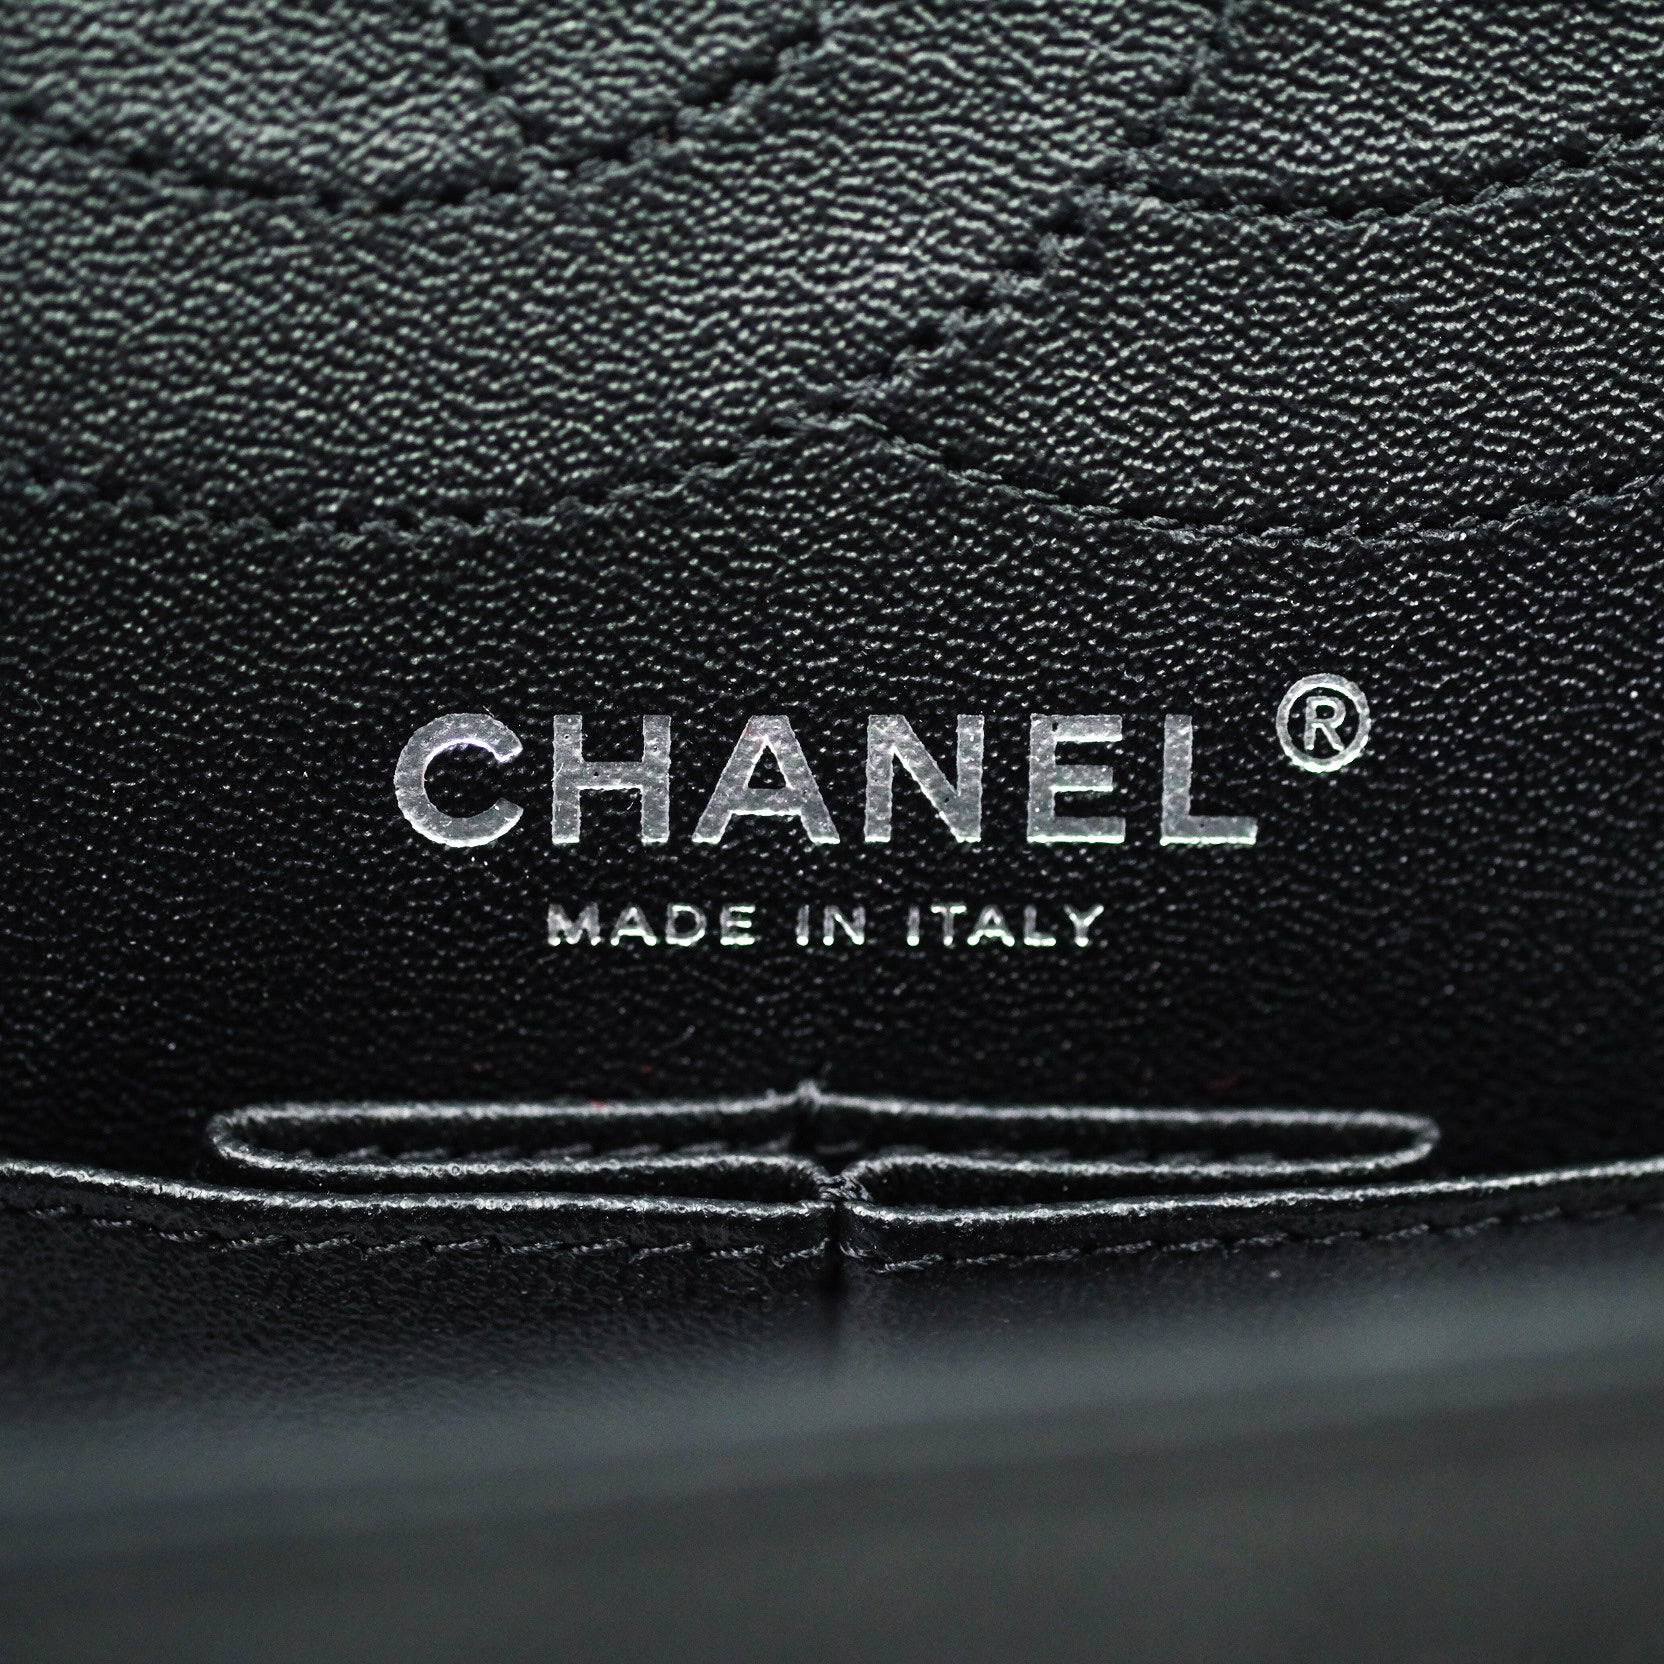 Chanel 2.55 Quilted Reissue 226 Double Flap So Black Crumpled